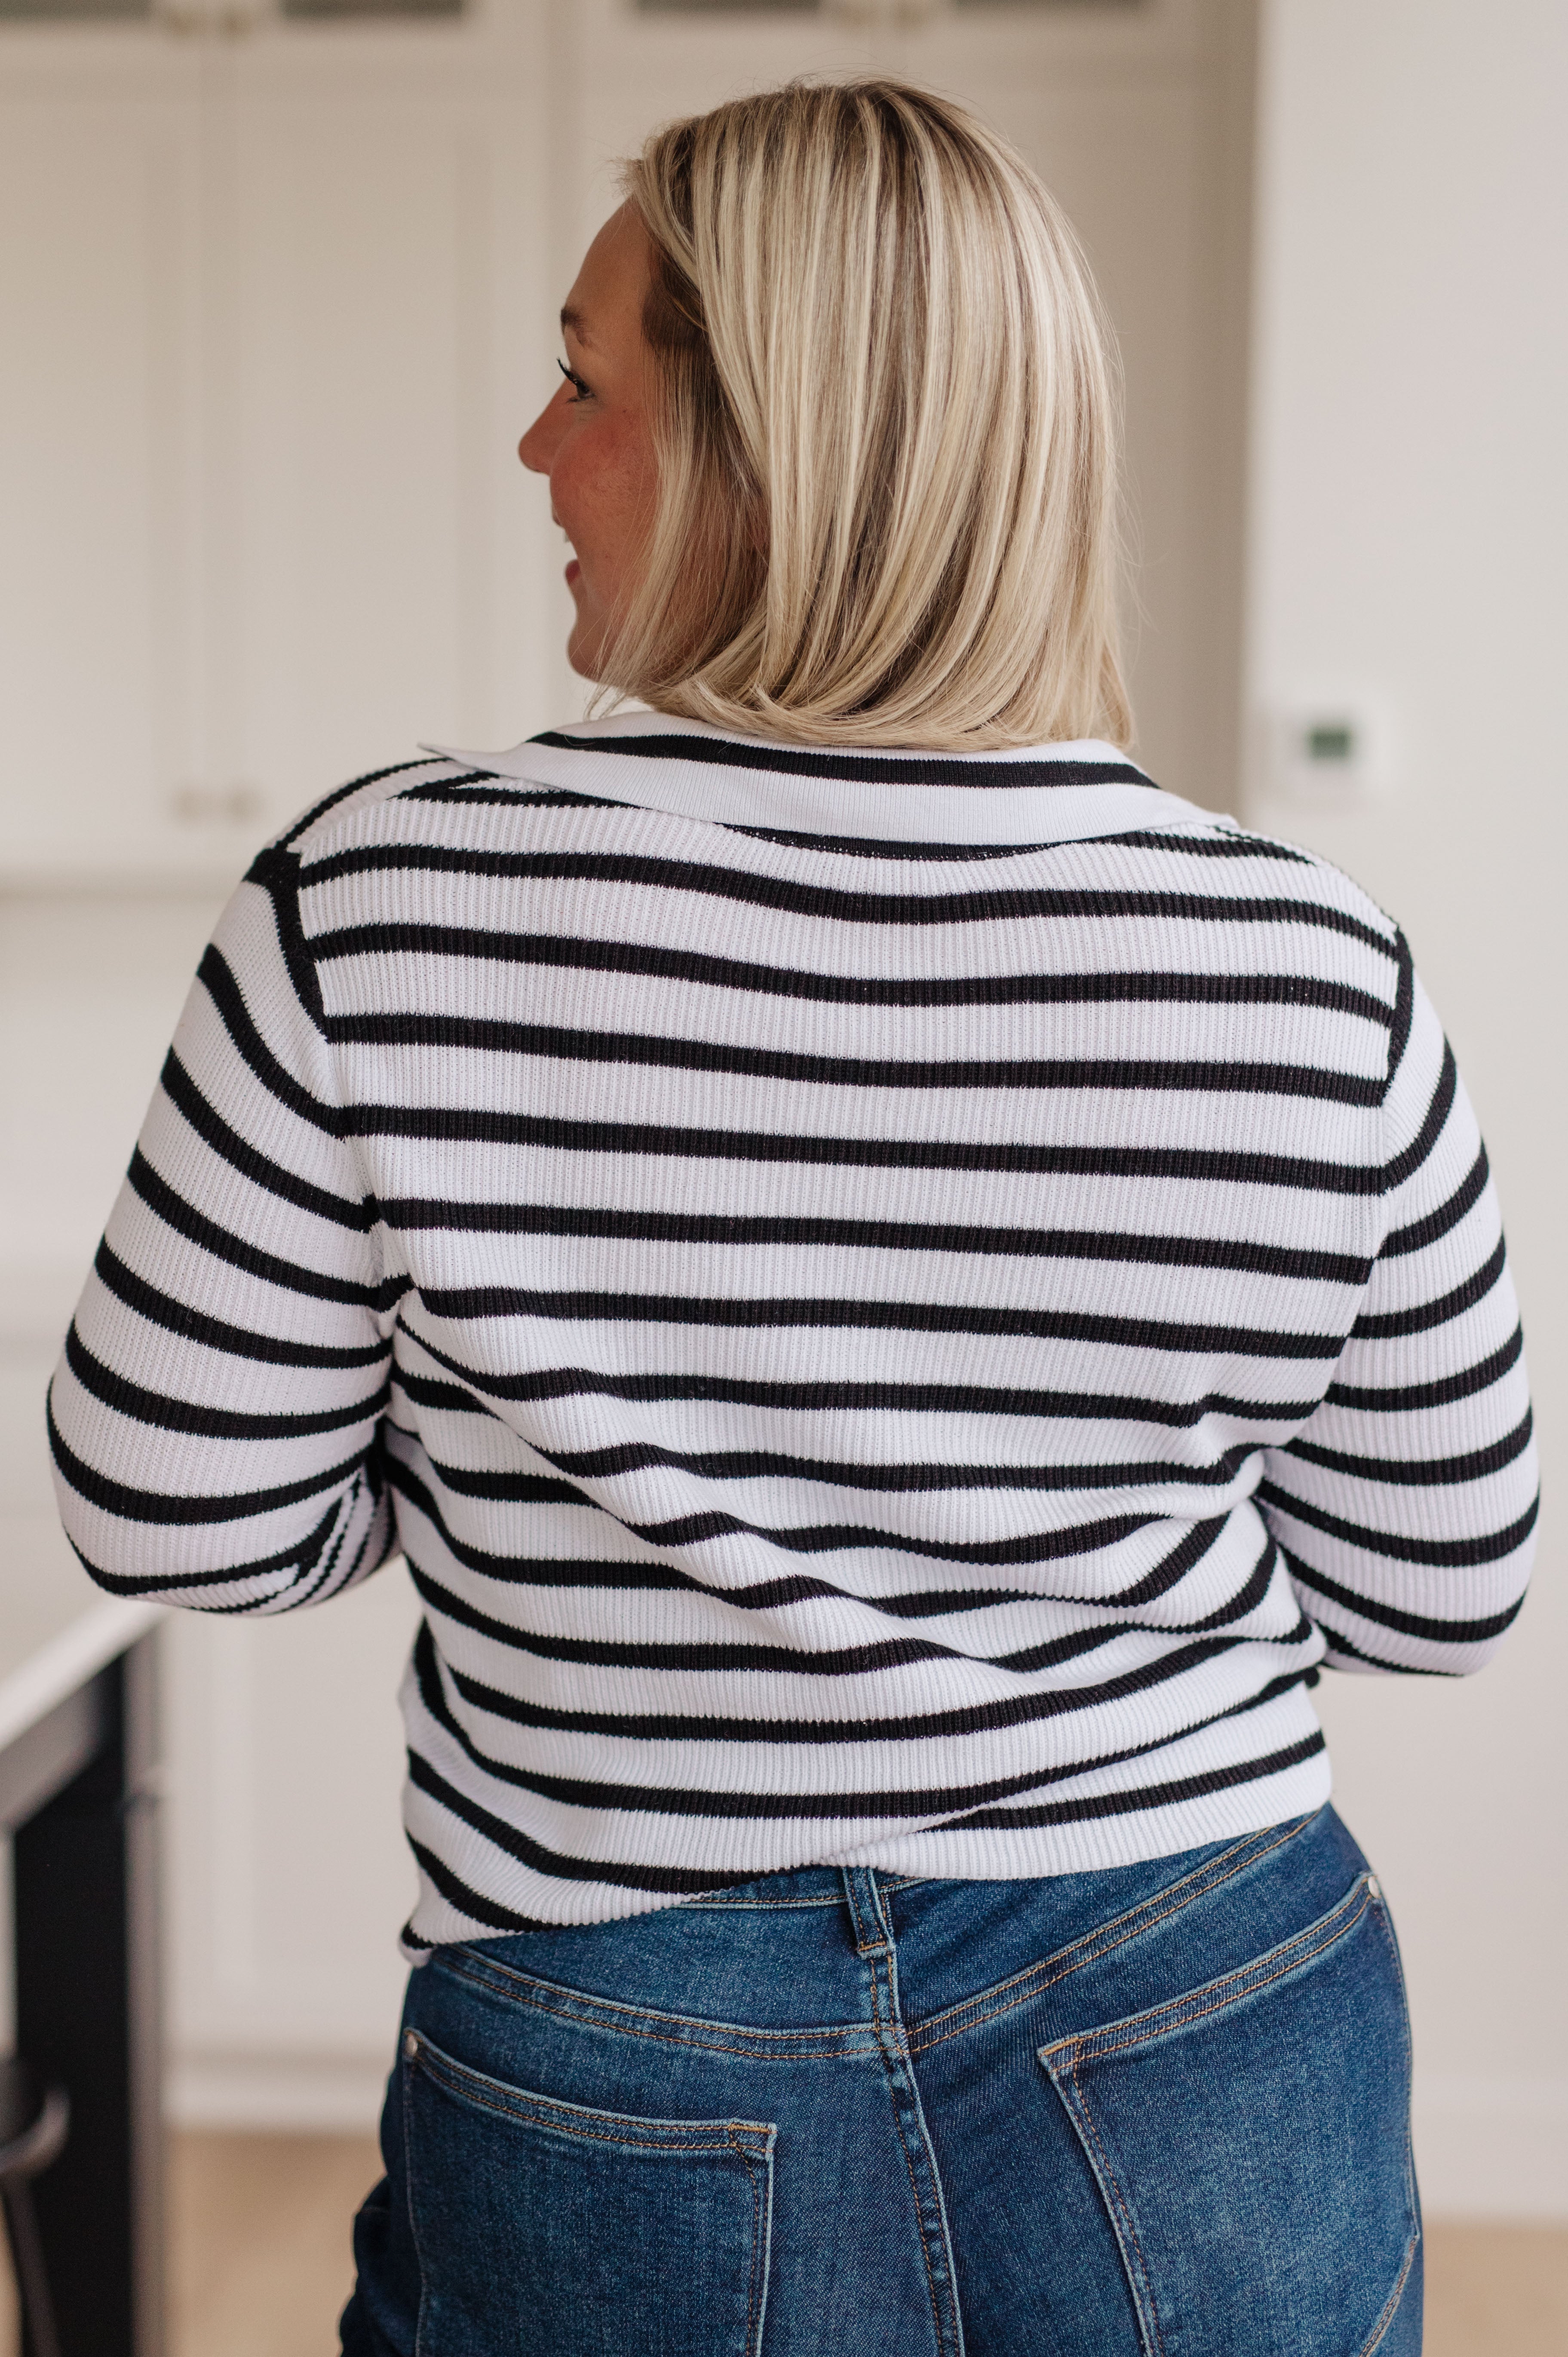 Self Improvement V-Neck Striped Sweater (Ships in 1-2 Weeks)